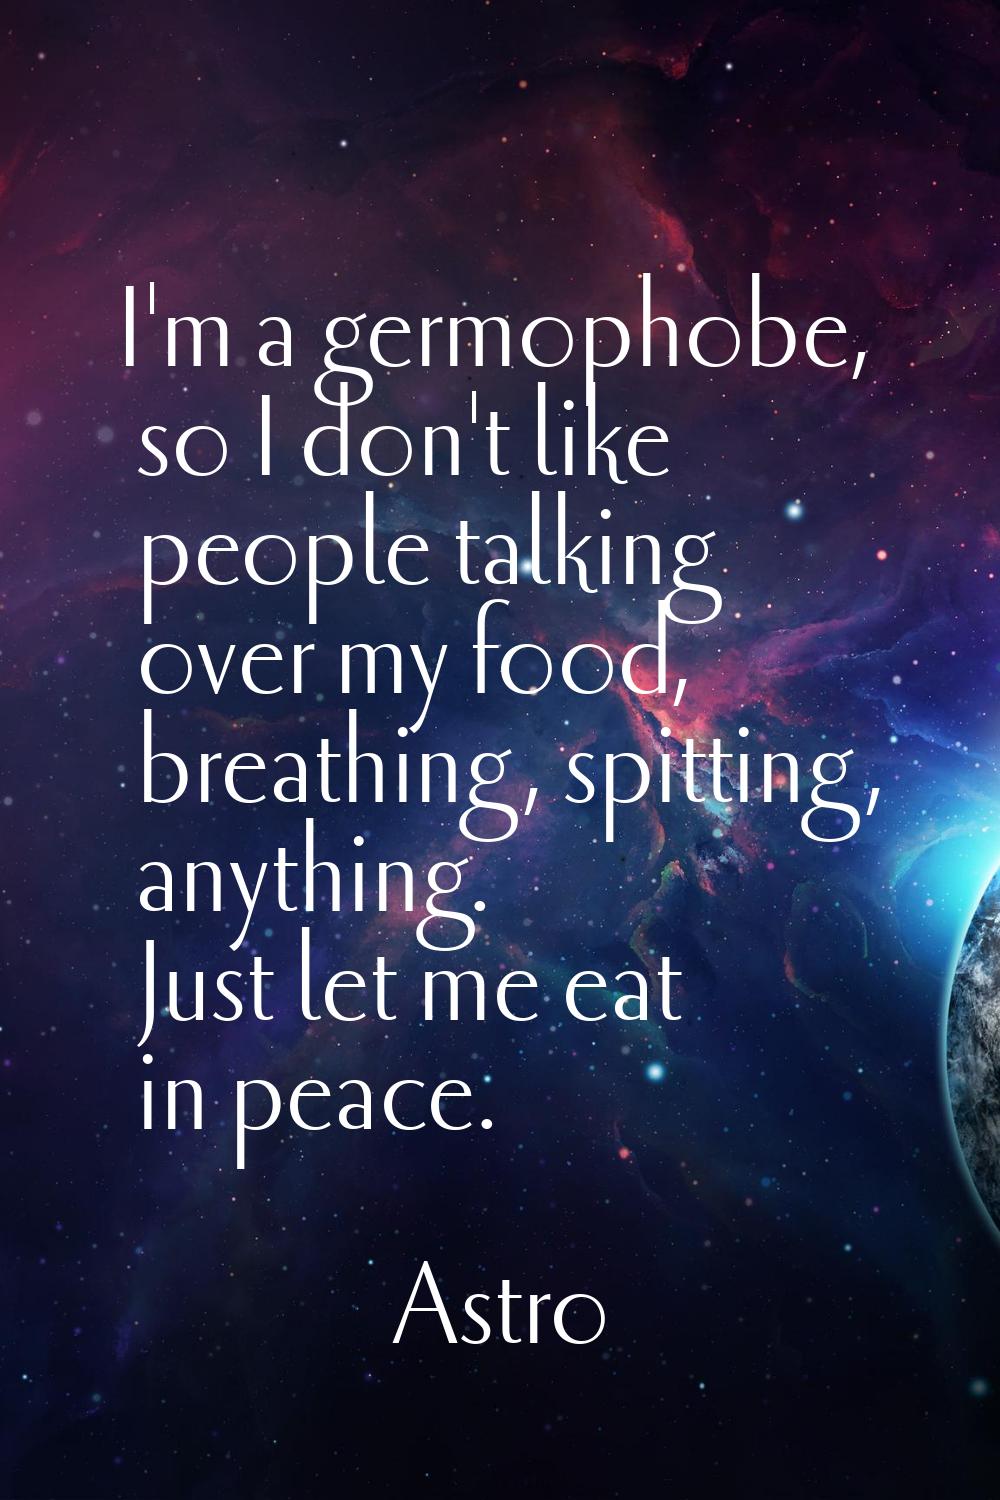 I'm a germophobe, so I don't like people talking over my food, breathing, spitting, anything. Just 